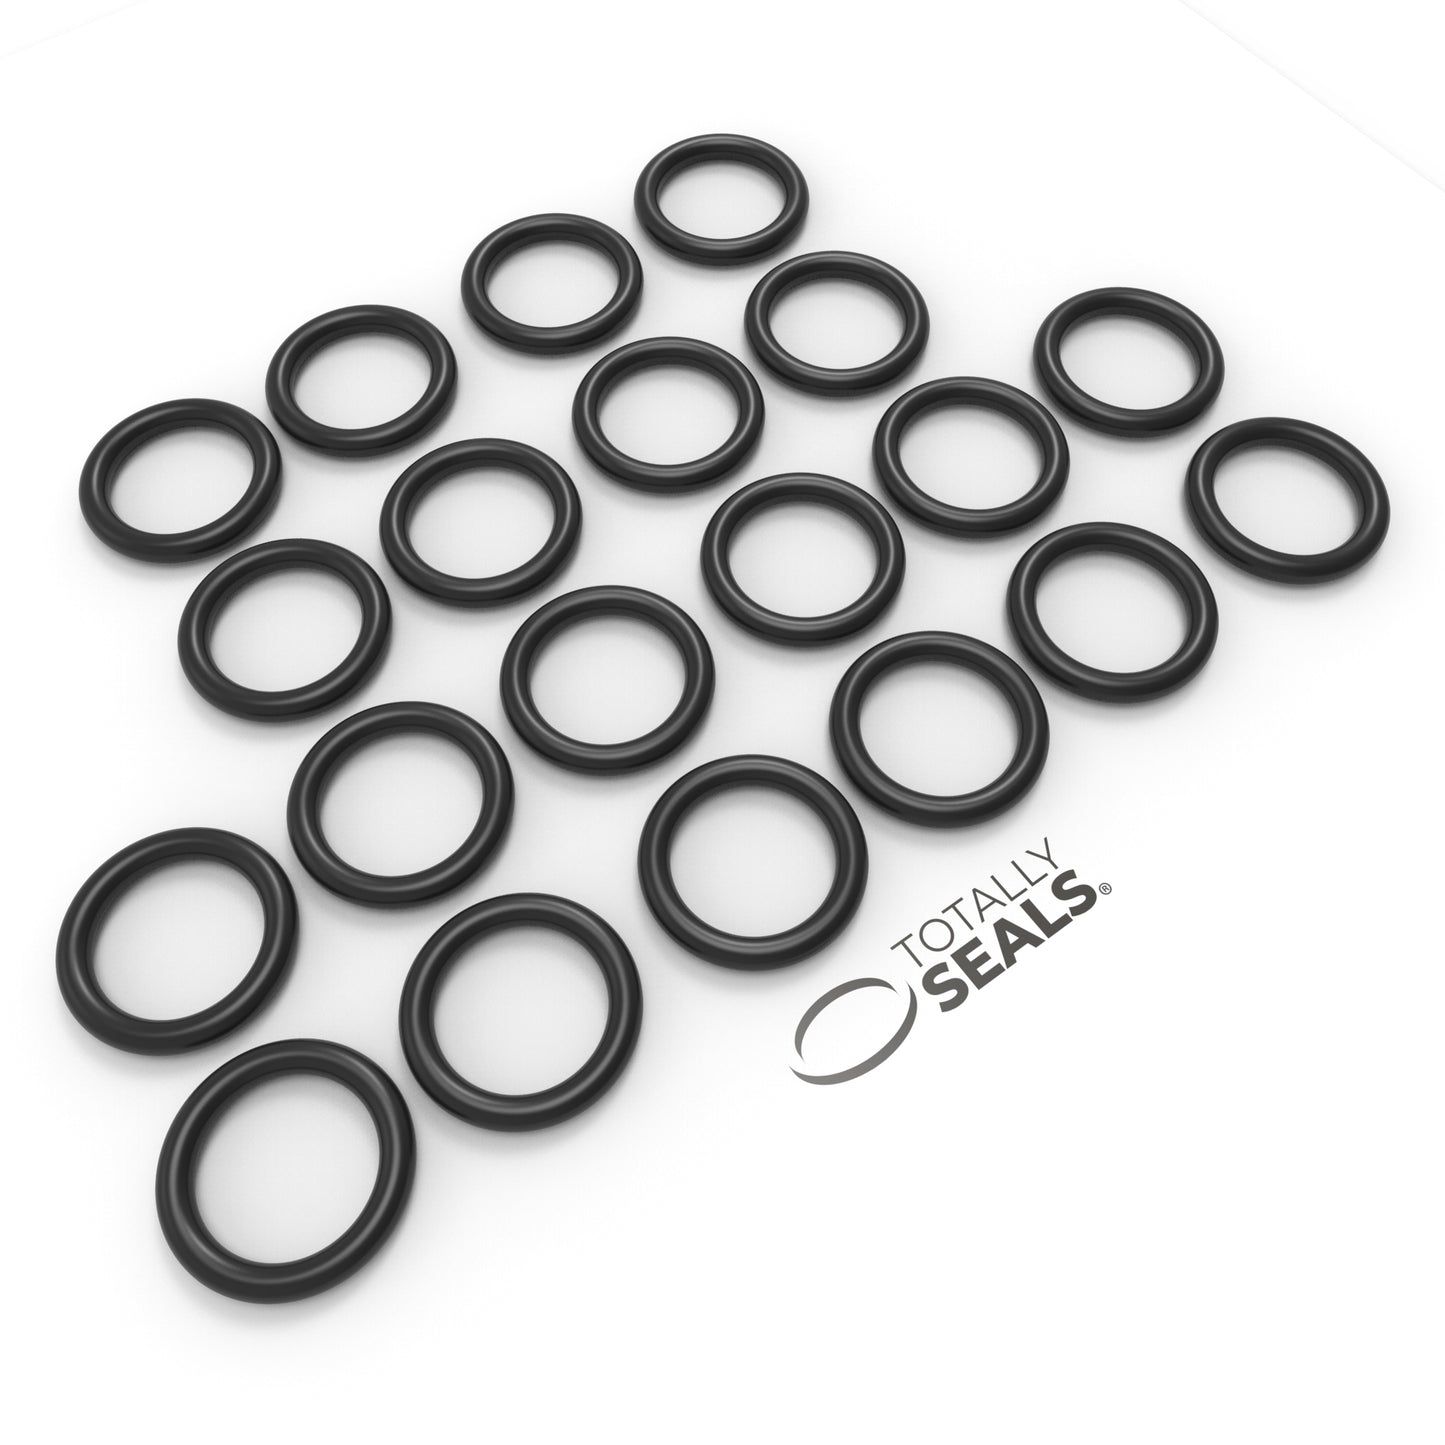 45mm x 2.5mm (50mm OD) Nitrile O-Rings - Totally Seals®